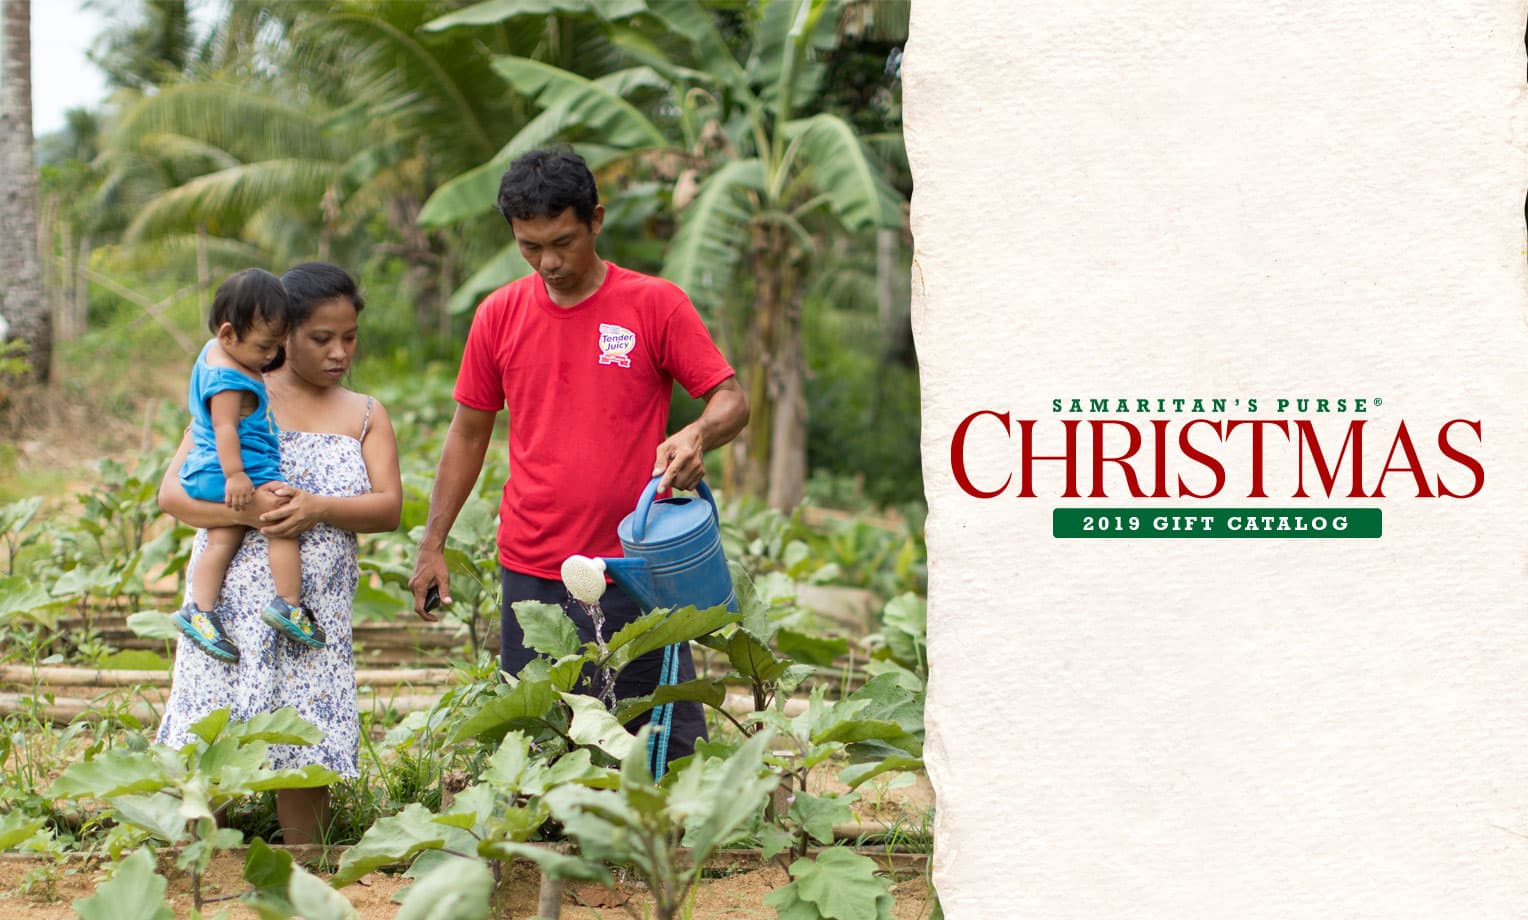 Samaritan's Purse is helping impoverished families worldwide learn innovative farming techniques to help increase their harvests.